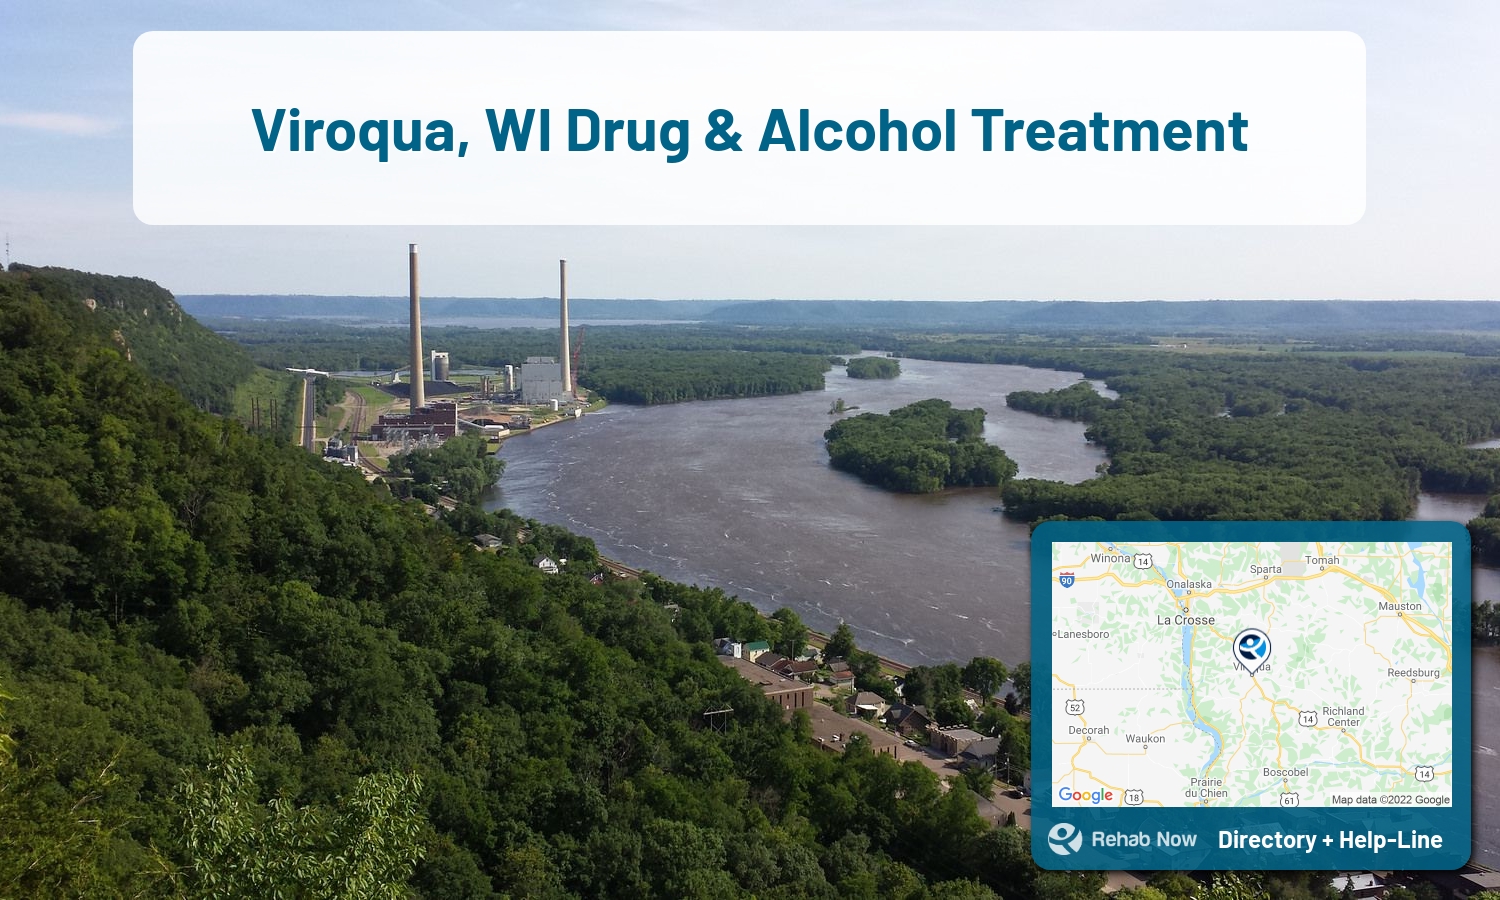 Let our expert counselors help find the best addiction treatment in Viroqua, Wisconsin for you or a loved one now with a free call to our hotline.